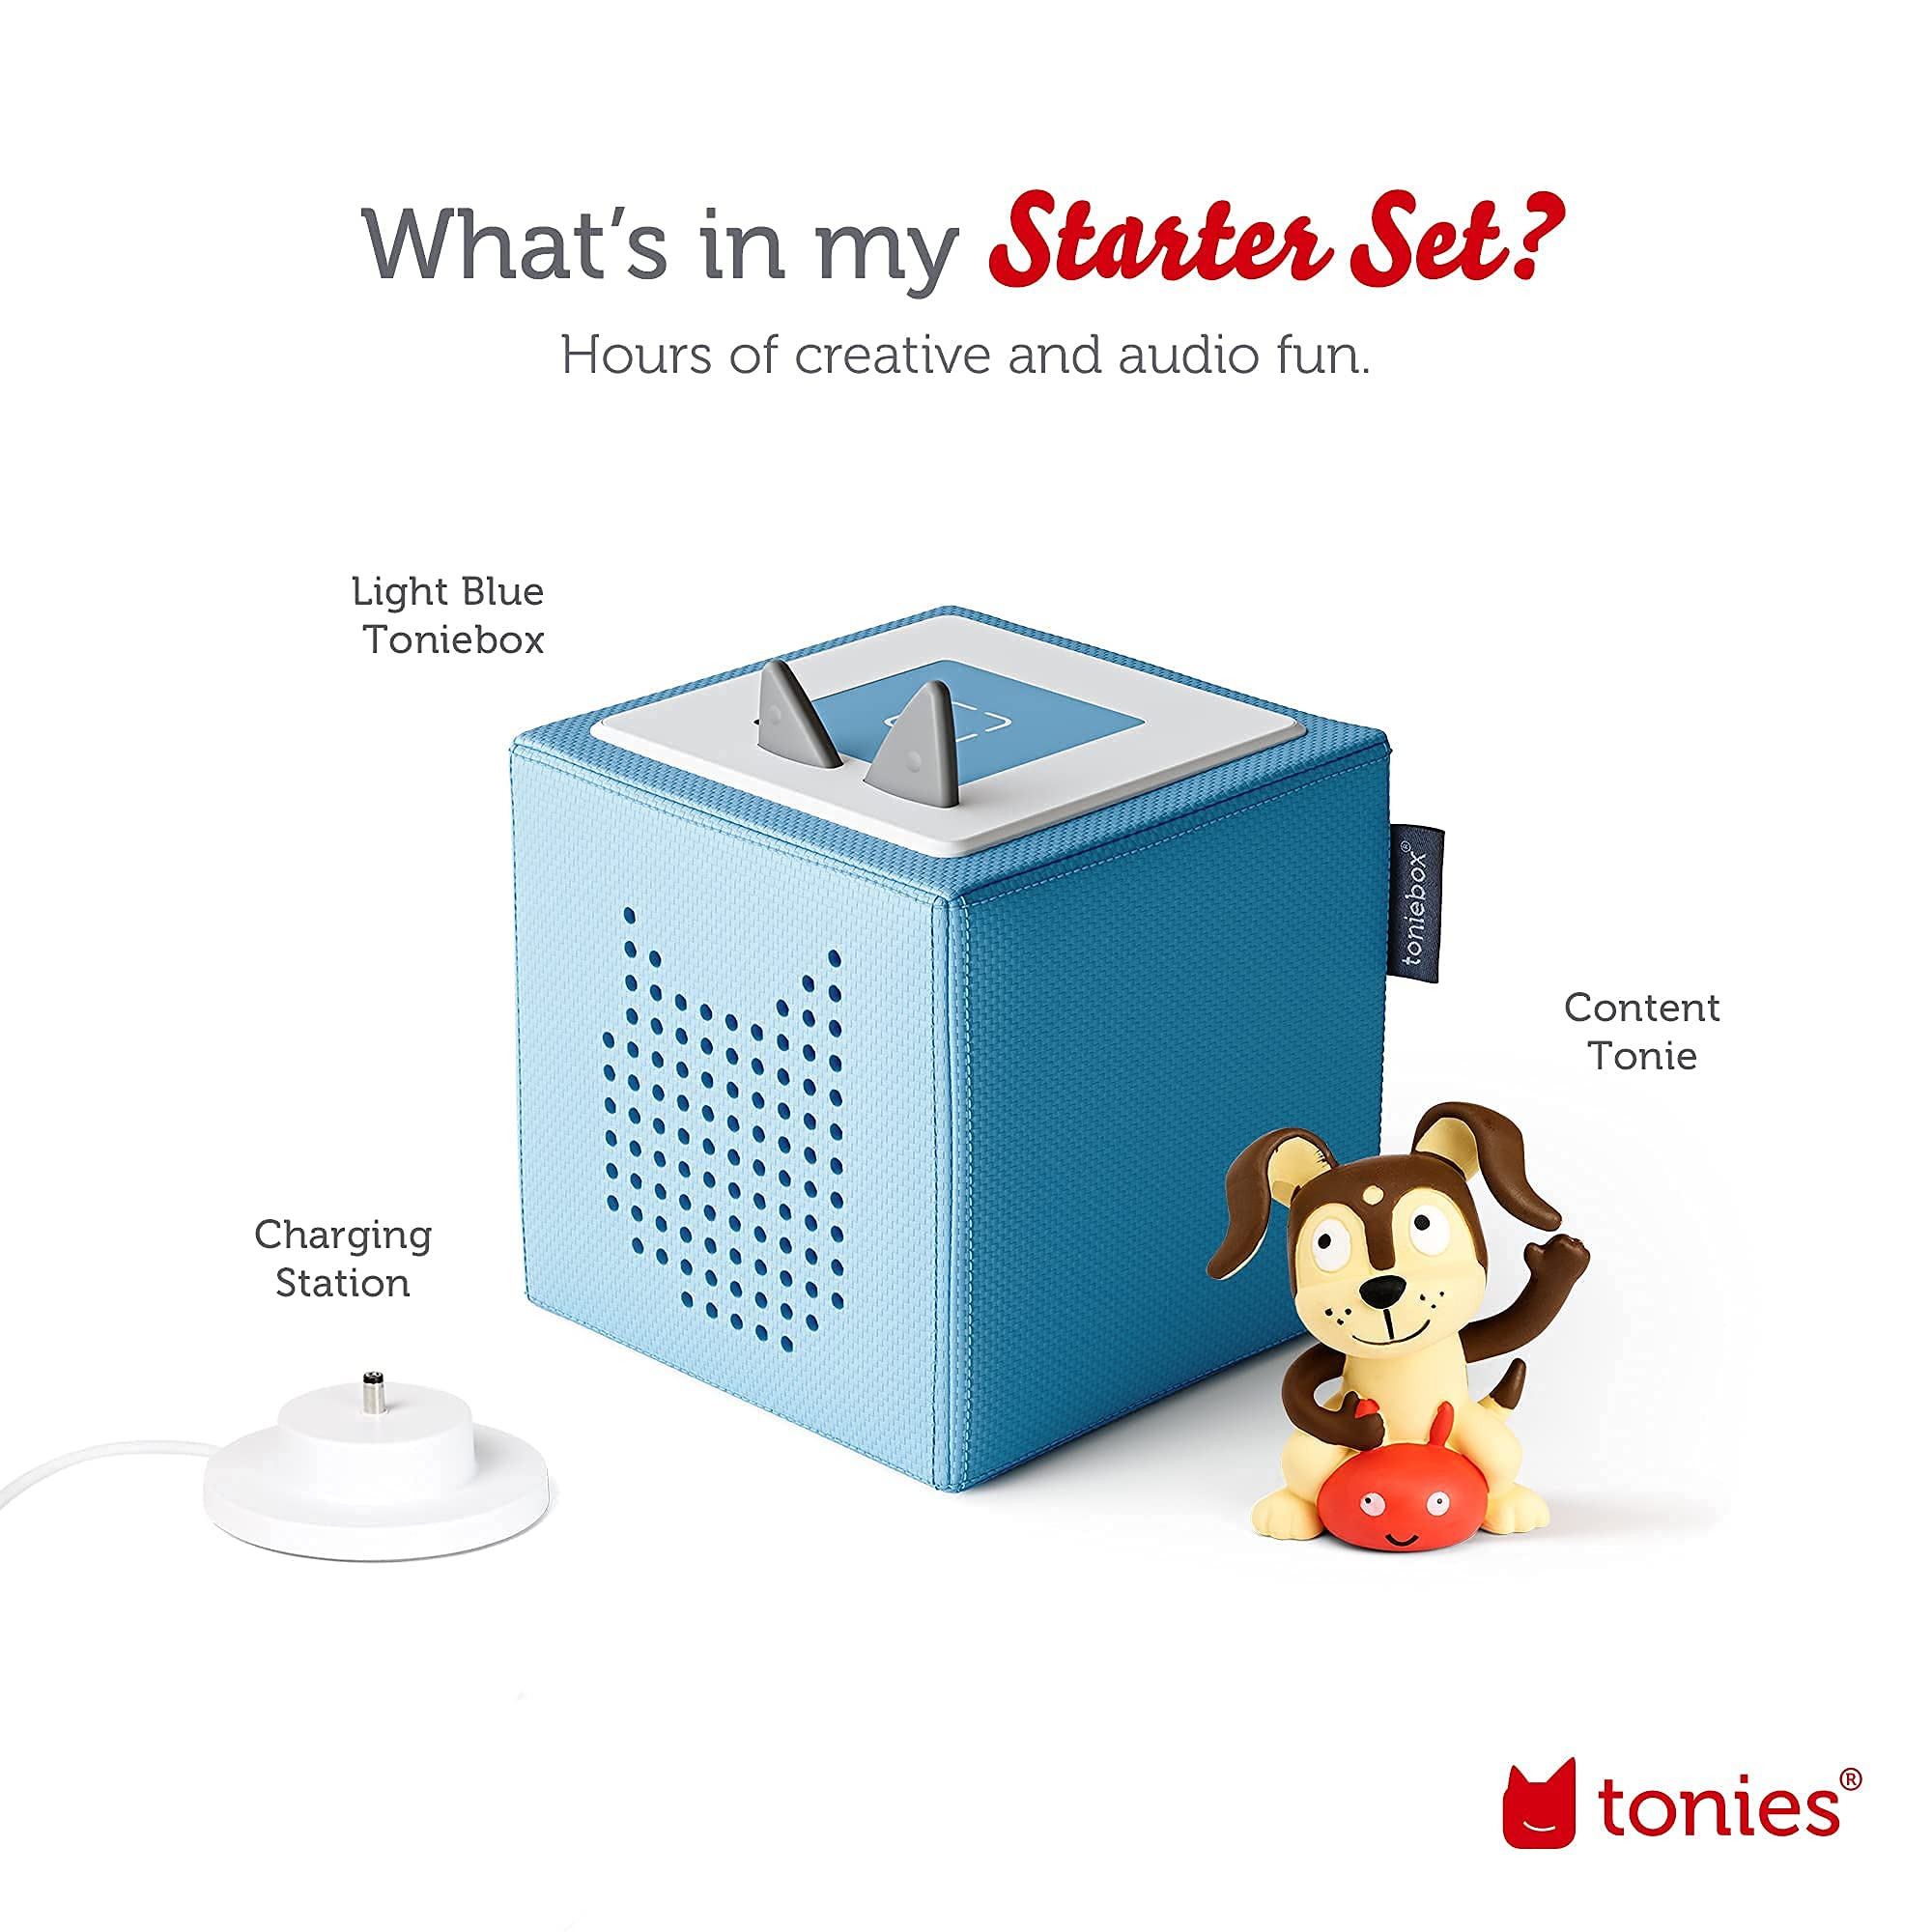 Tonies Toniebox Light Blue Starter Set with Playtime Songs